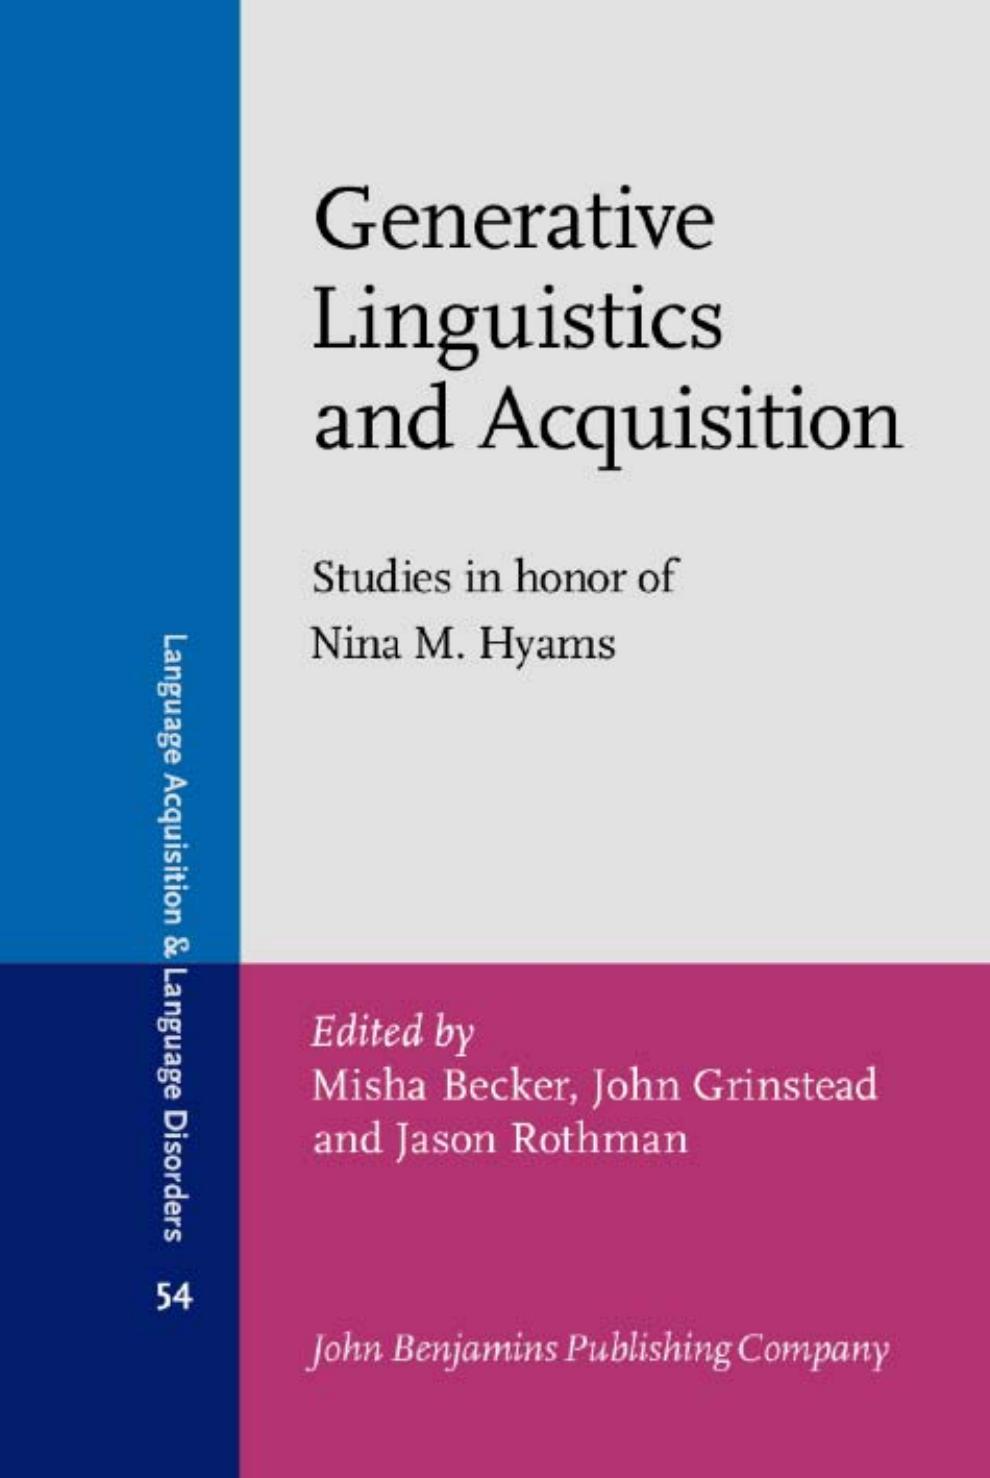 Generative Linguistics and Acquisition: Studies in Honor of Nina M. Hyams